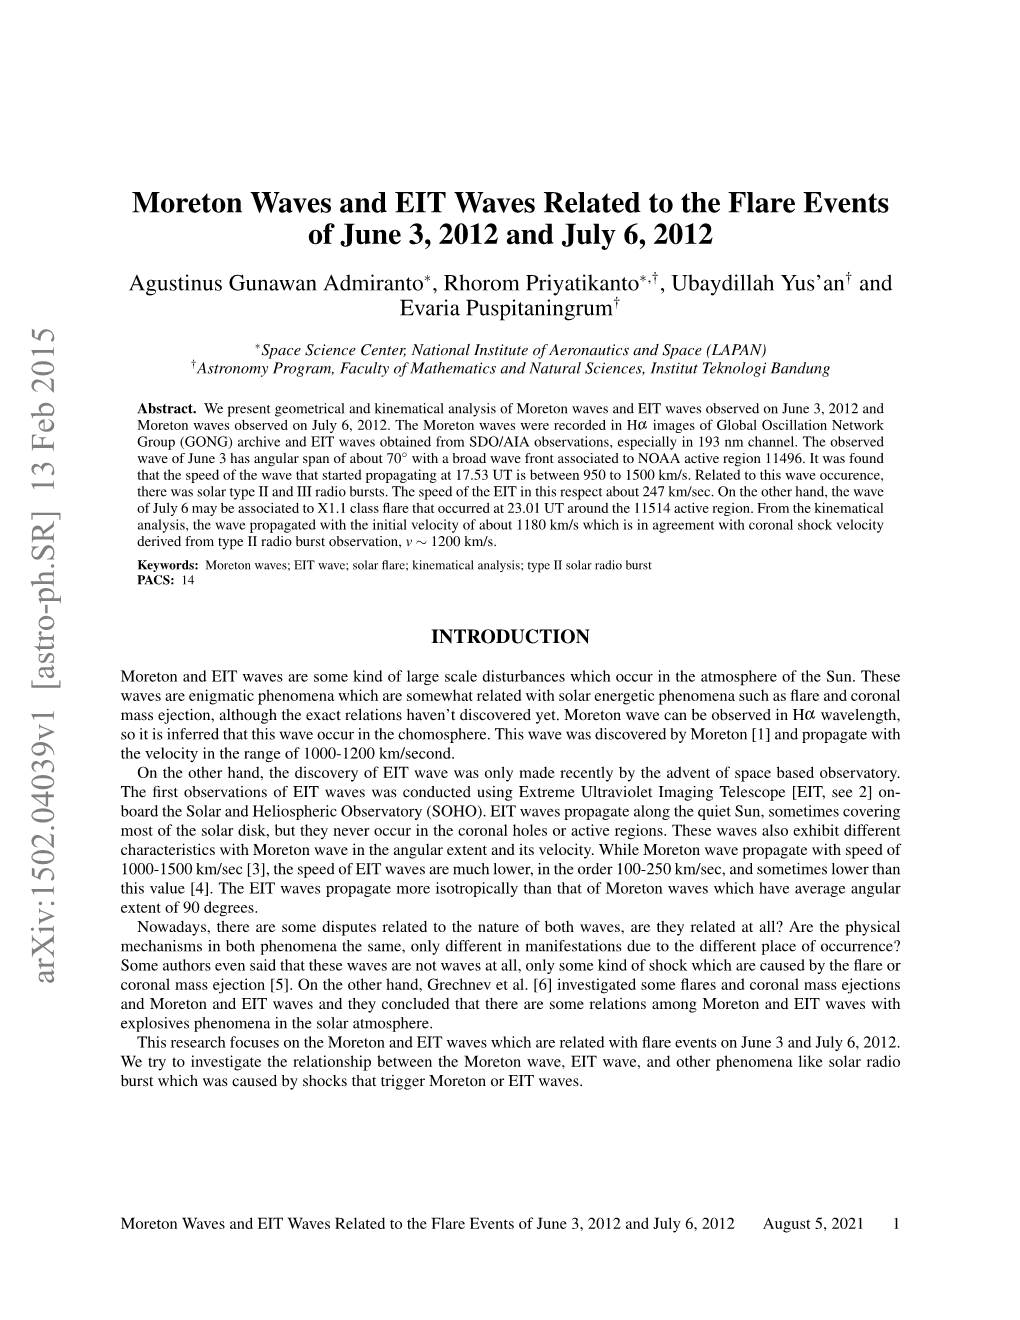 Moreton Waves and EIT Waves Related to the Flare Events of June 3, 2012 and July 6, 2012